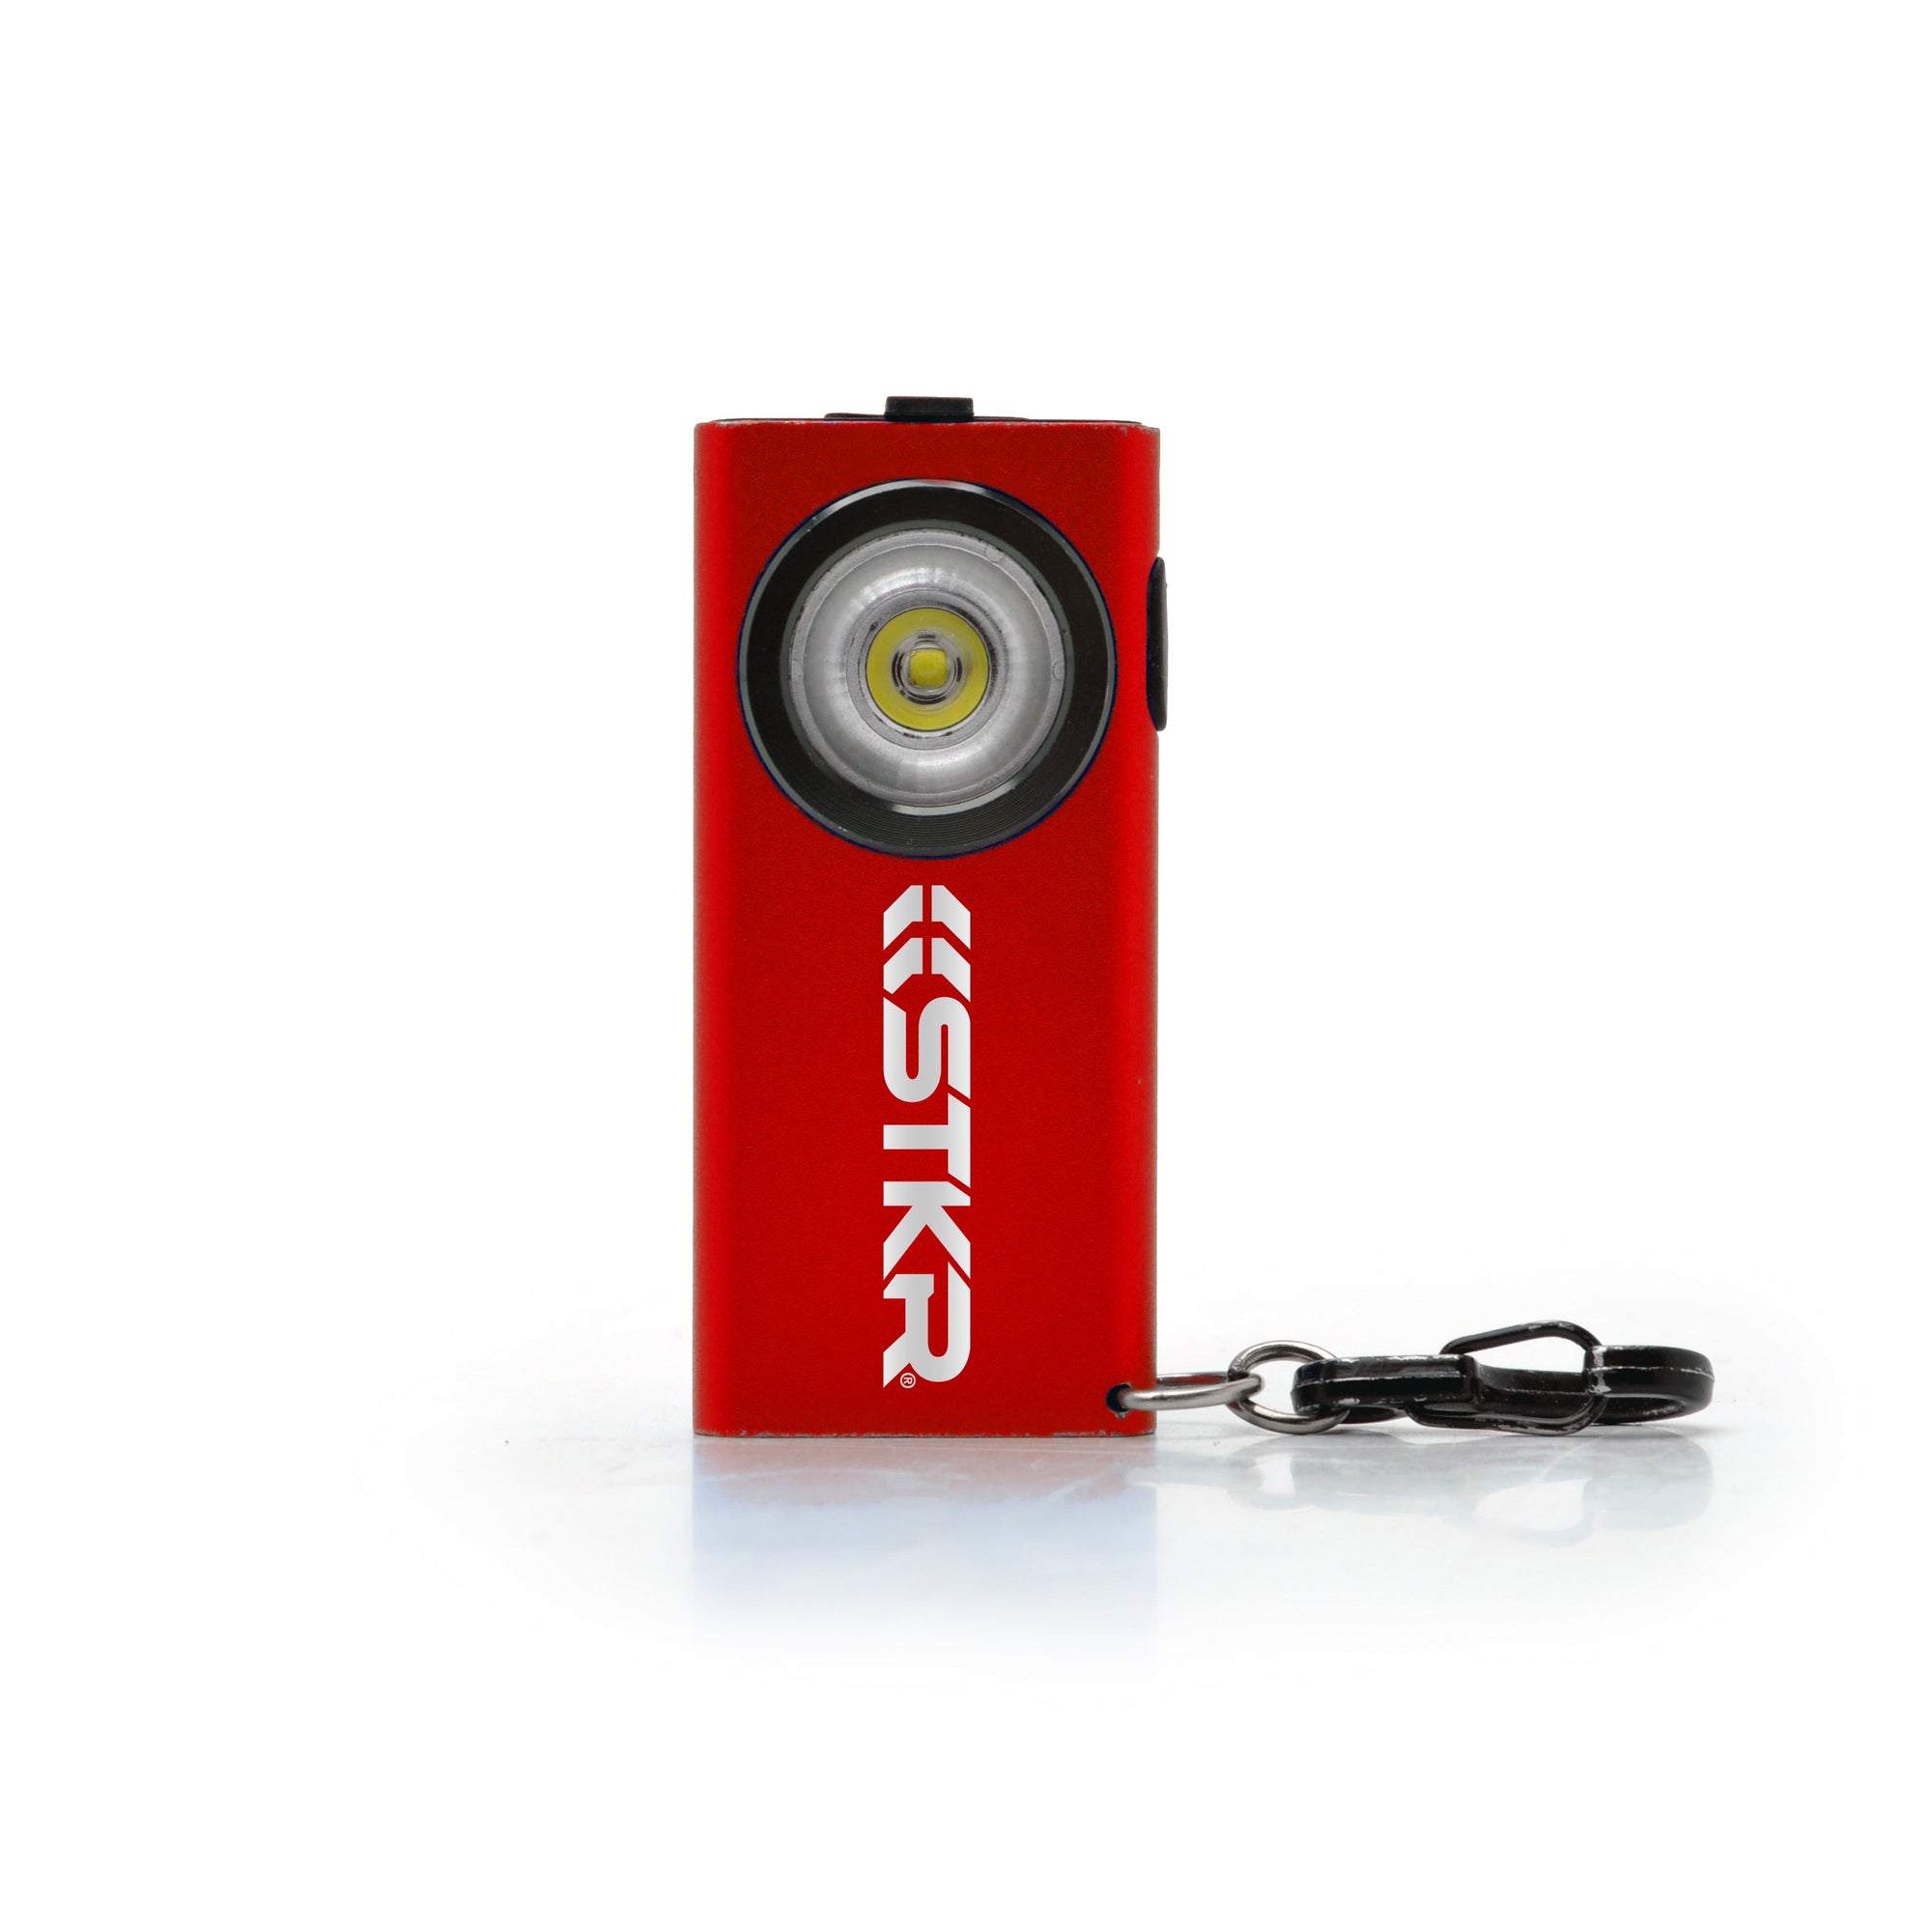 SlimJimmy Ultra-Bright Keychain Light - Red - Front